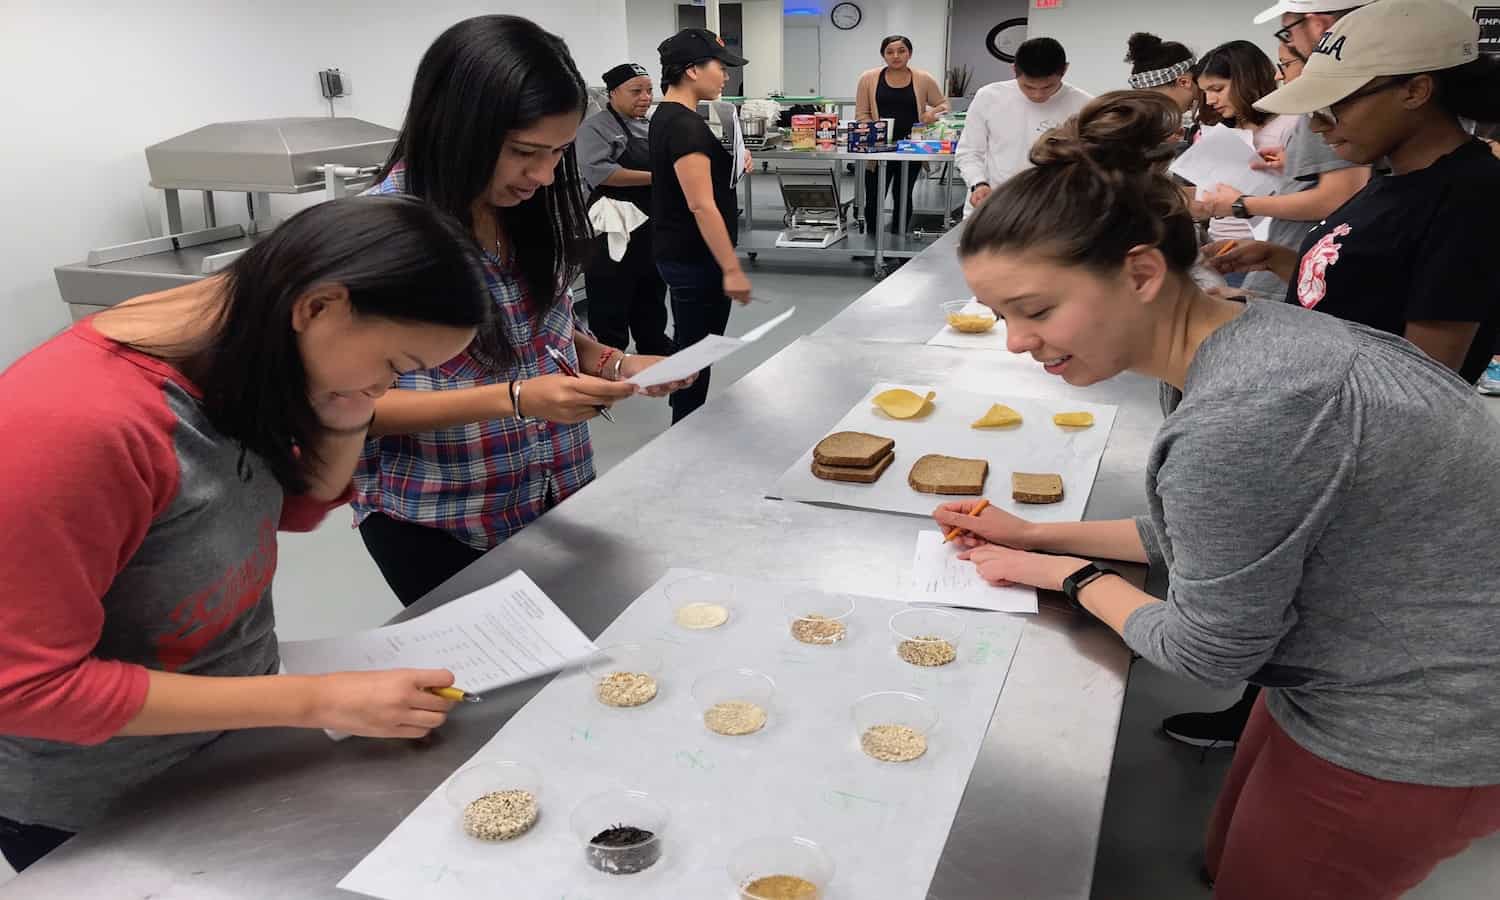 Keck School of Medicine of USC has partnered with L.A. Kitchen to help future doctors provide holistic, practical nutrition advice.